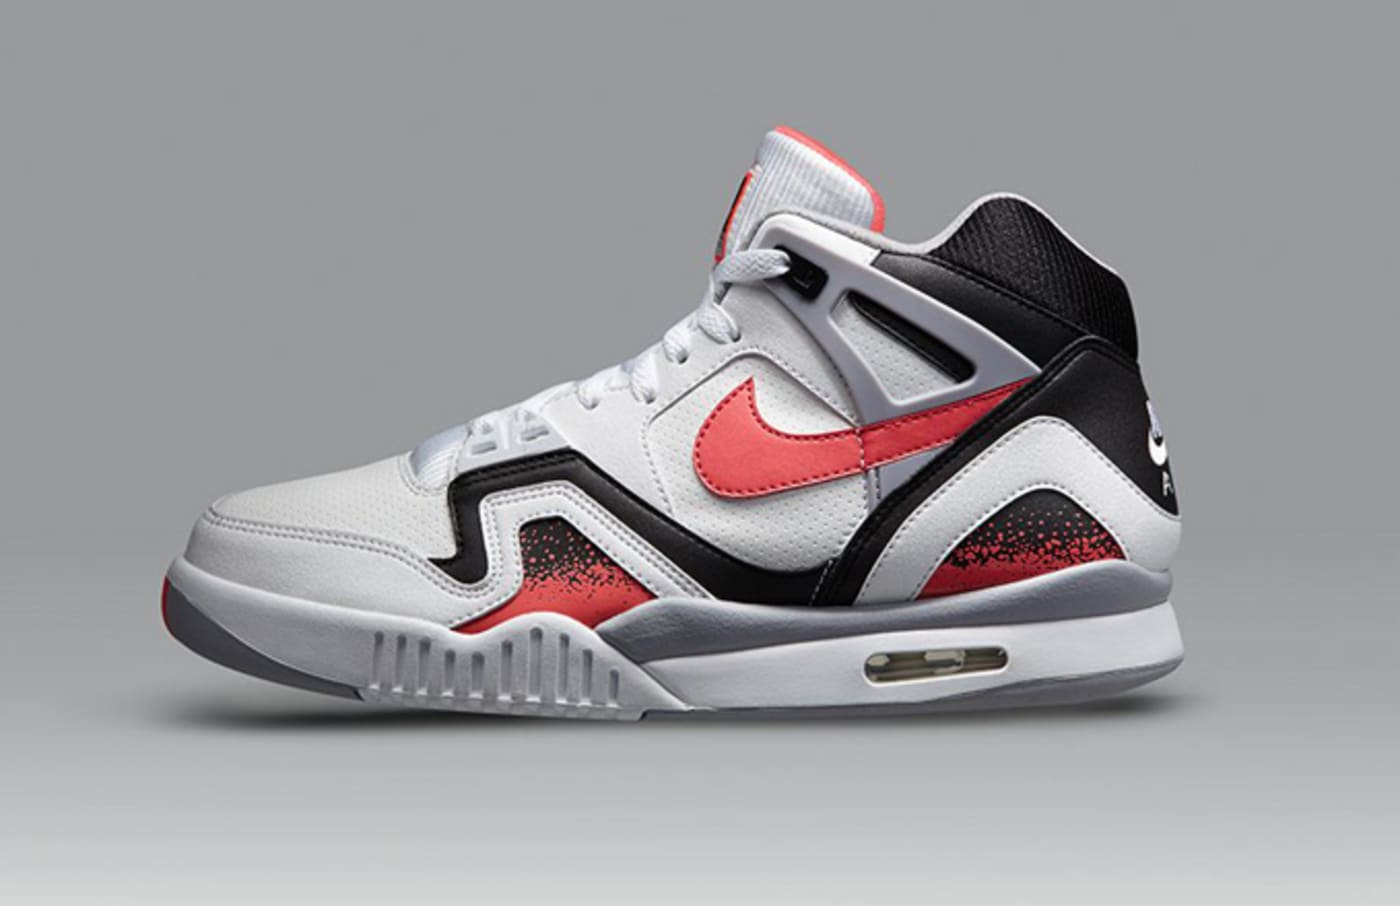 Andre Agassi Reminisces on the “Hot Lava” Nike Air Tech Challenge II |  Complex